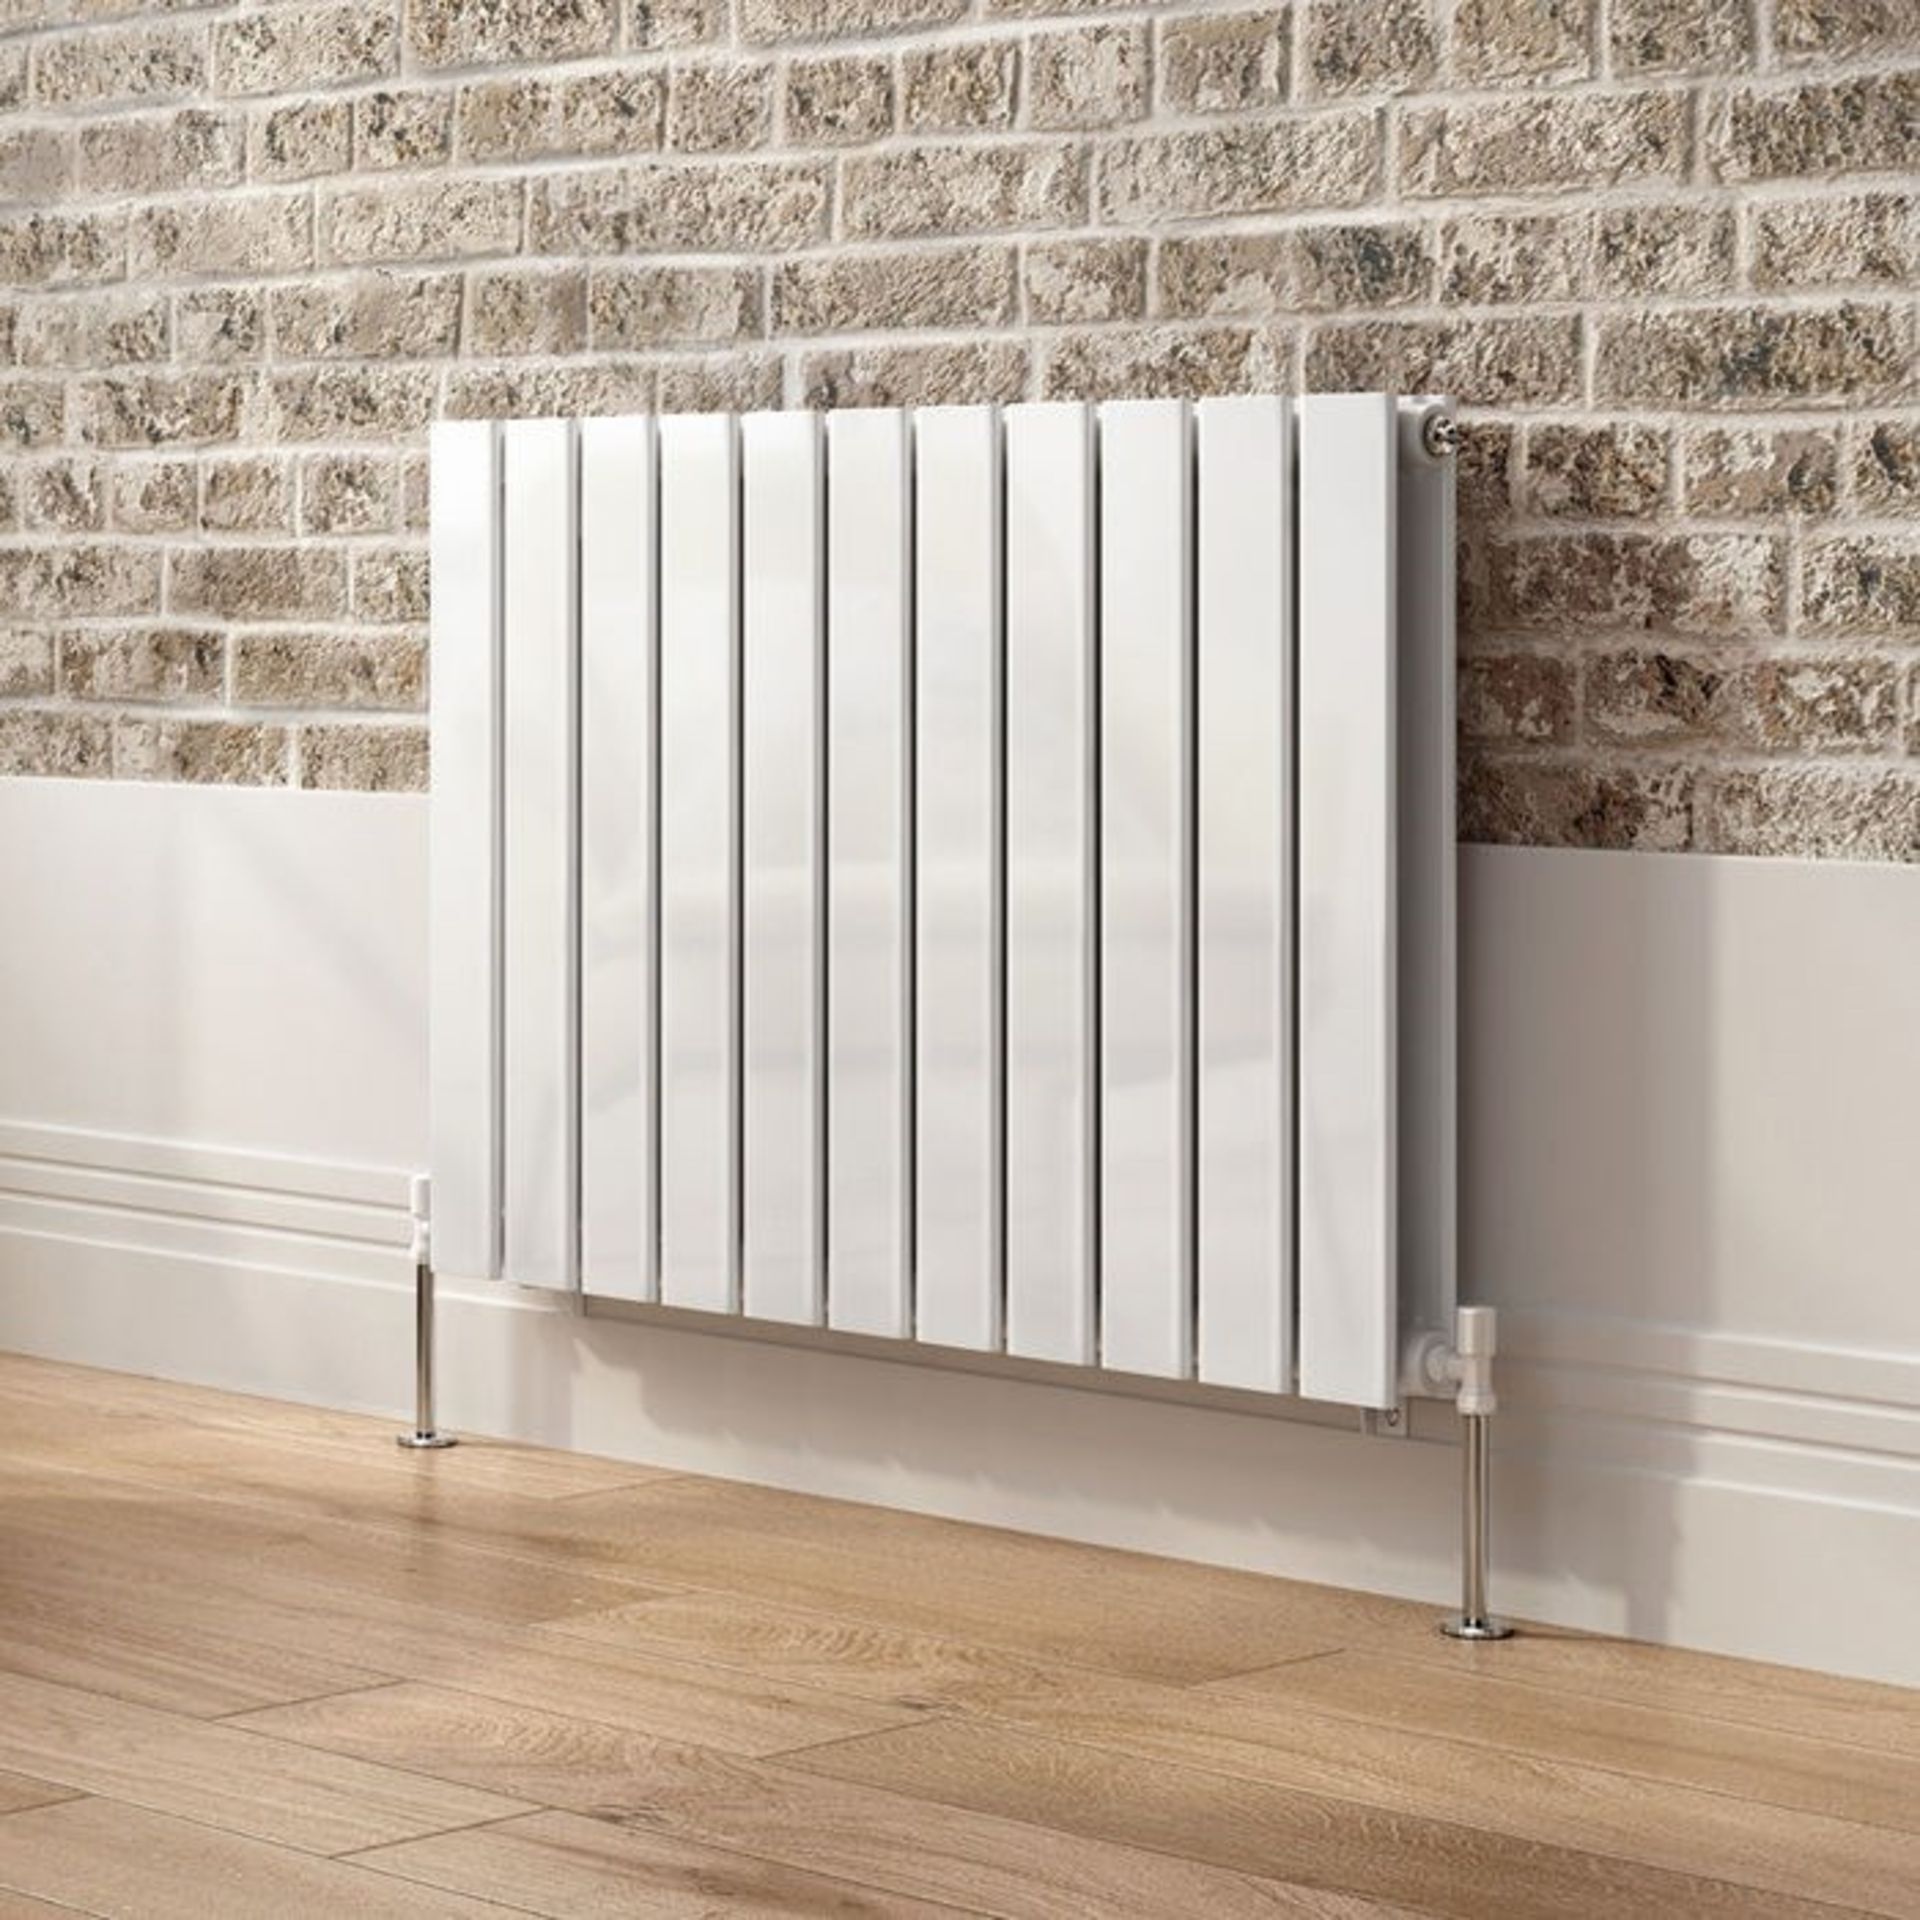 600x830mm Gloss White Double Flat Panel Horizontal Radiator. RRP £474.99.RC221.Made with high... - Image 2 of 4